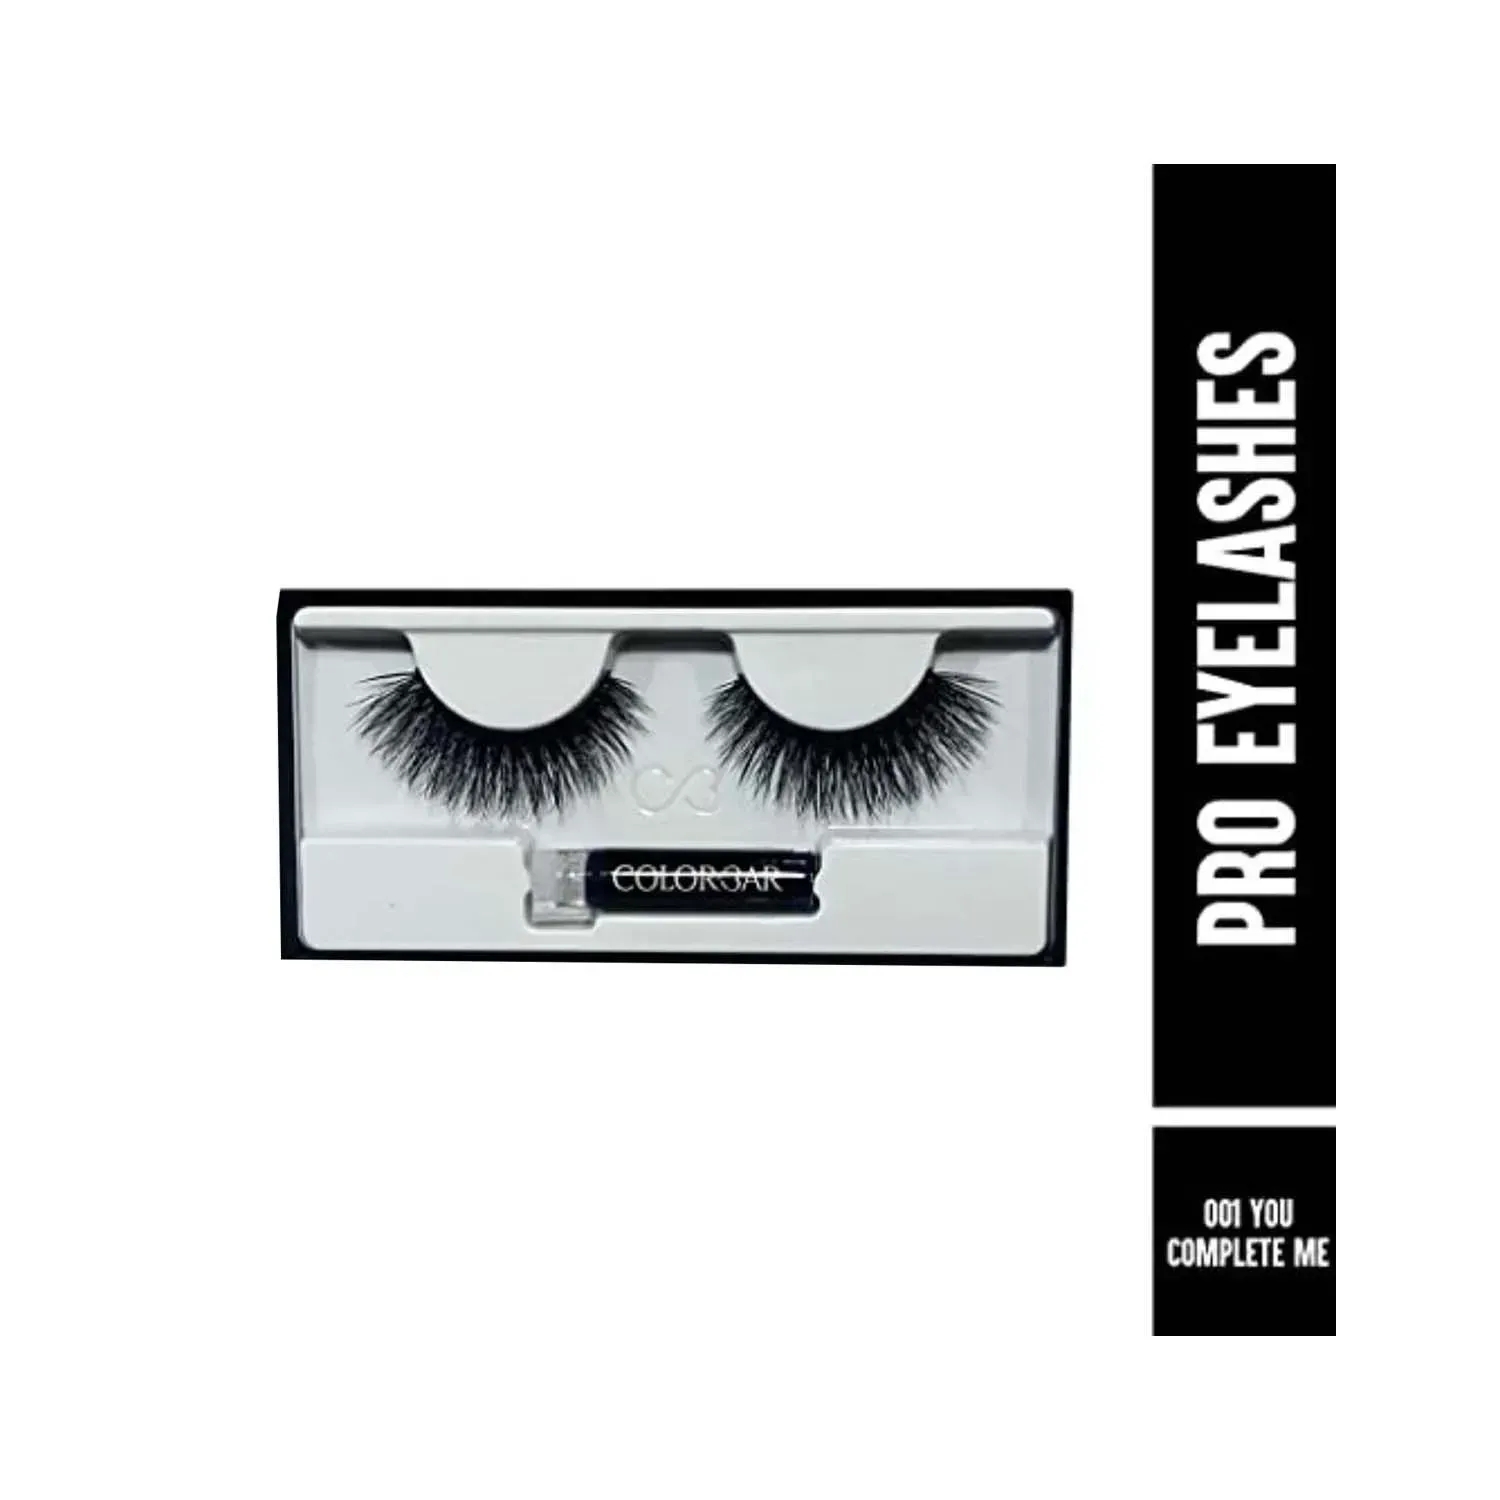 Colorbar Pro Eyelashes - 001 You Complete Me